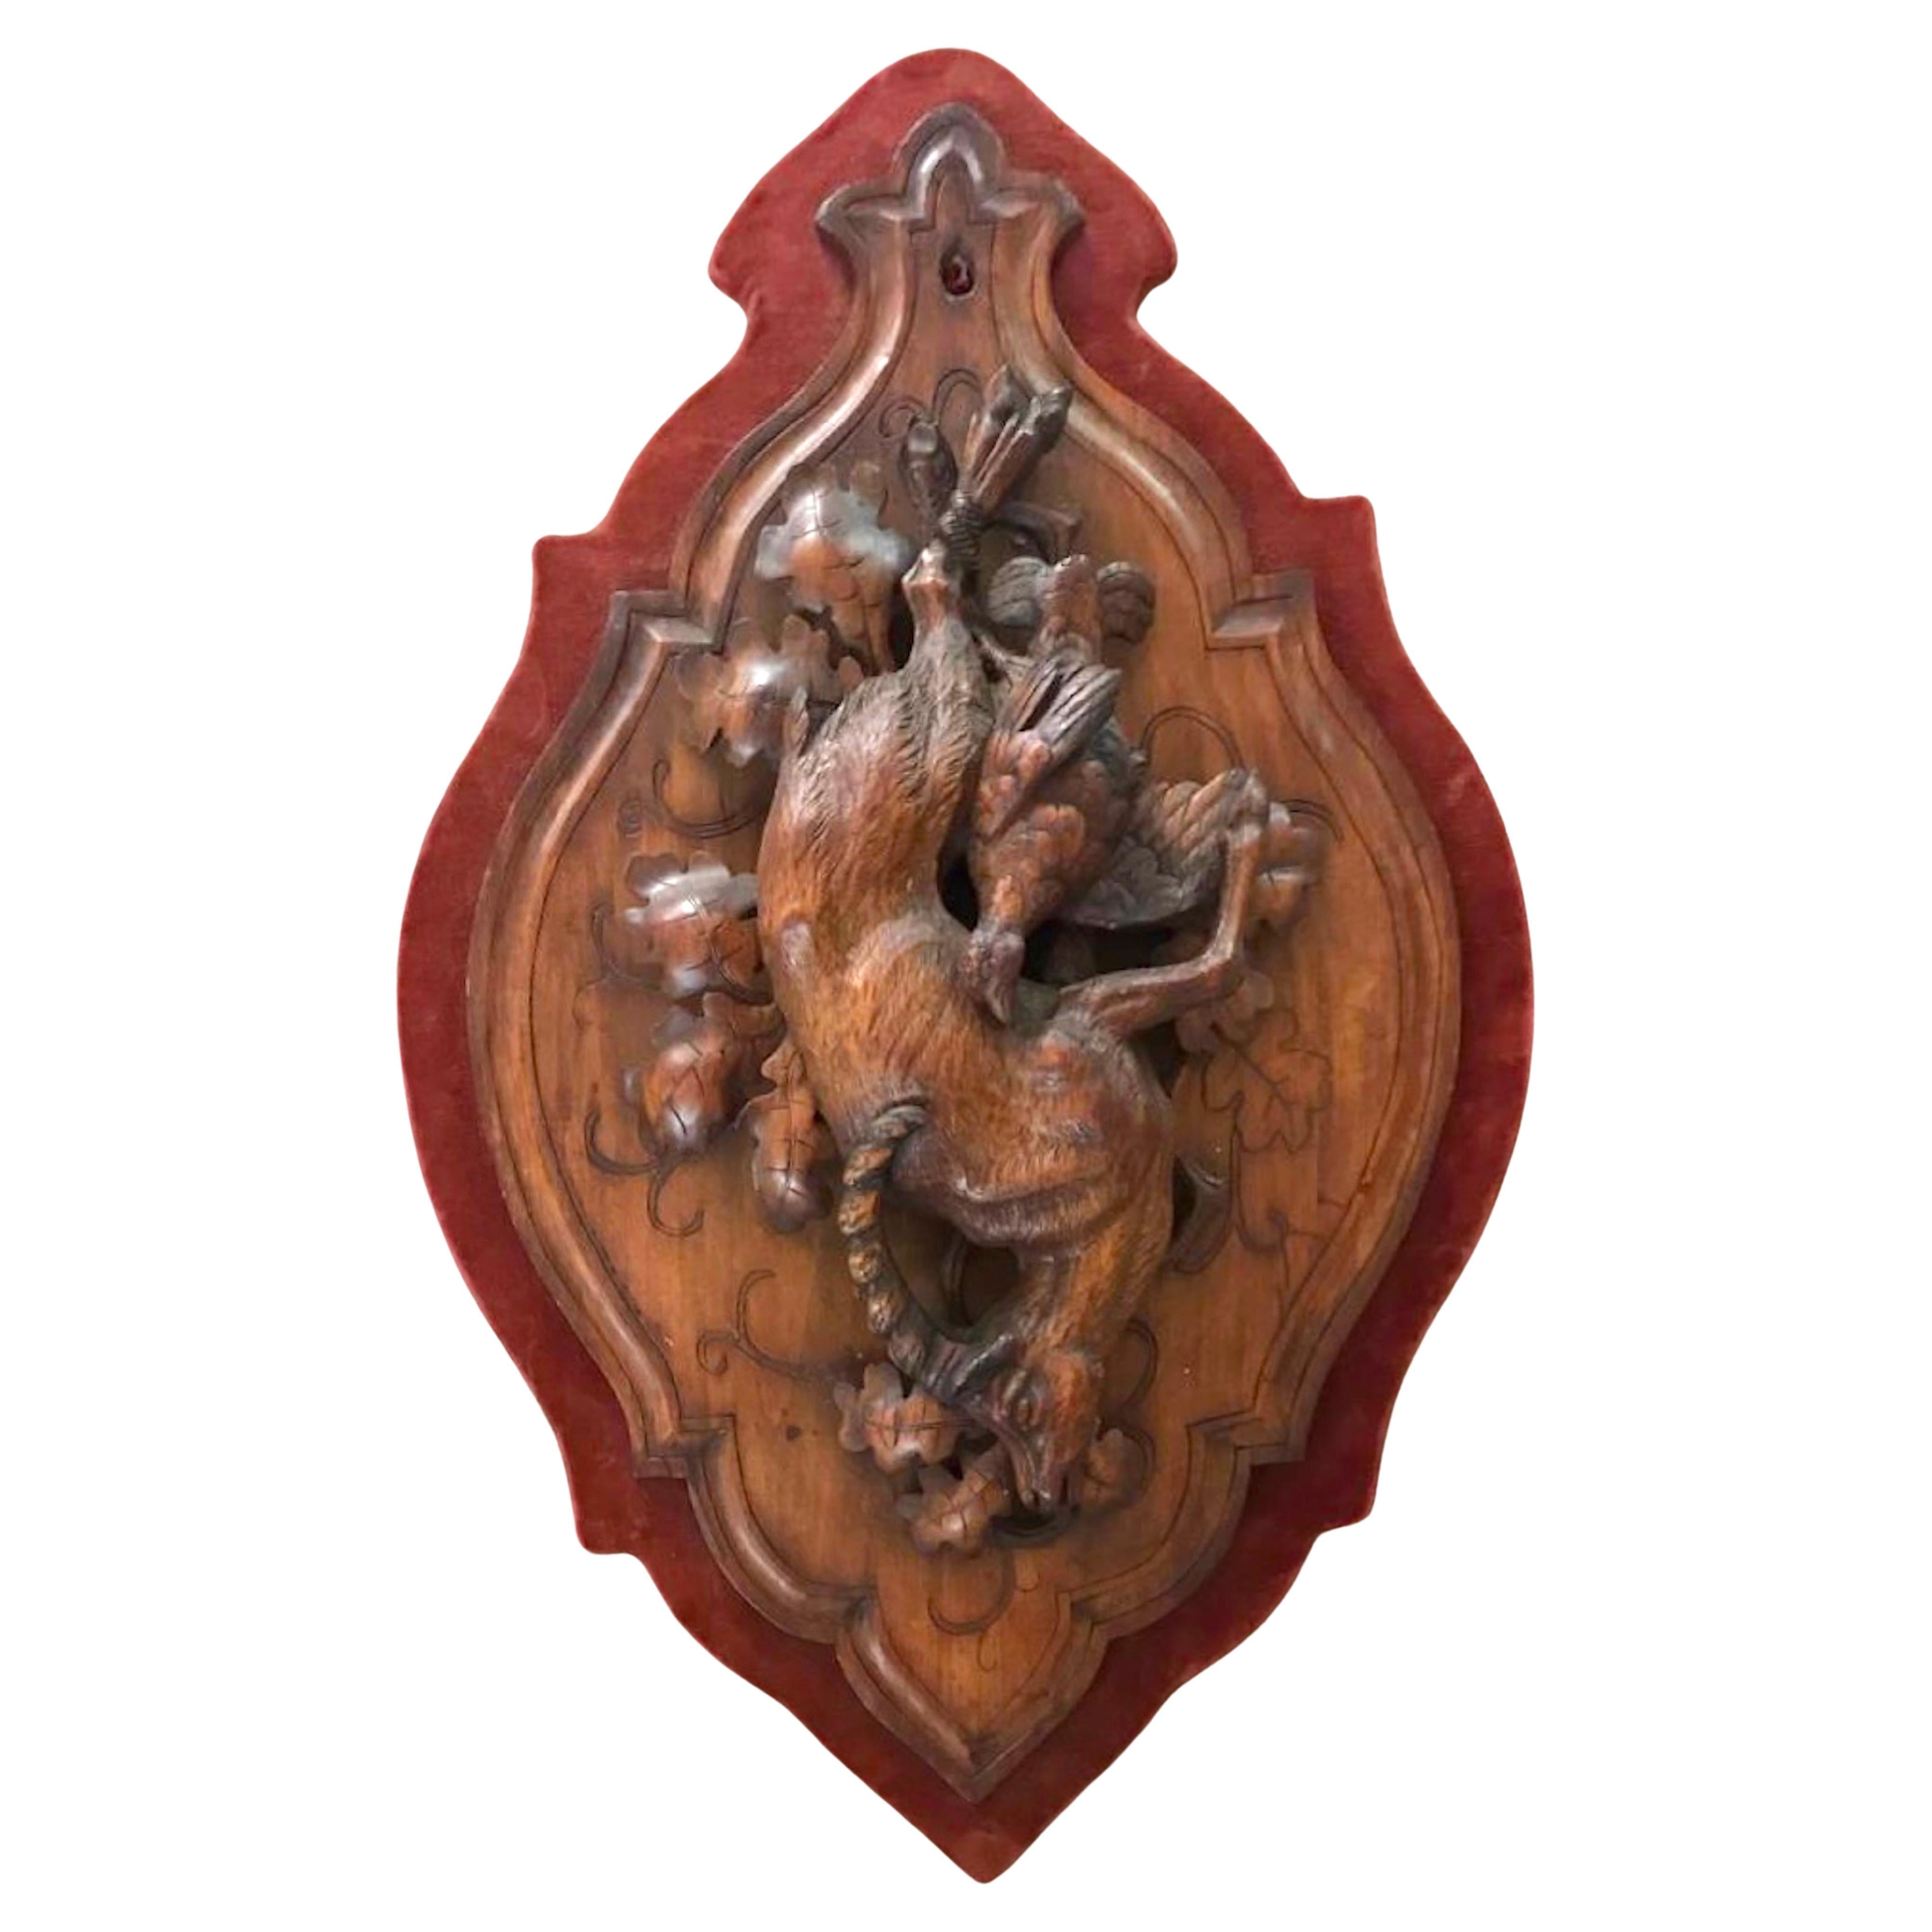 Late 19th Century Black Forest Wood Carved Game Plaque